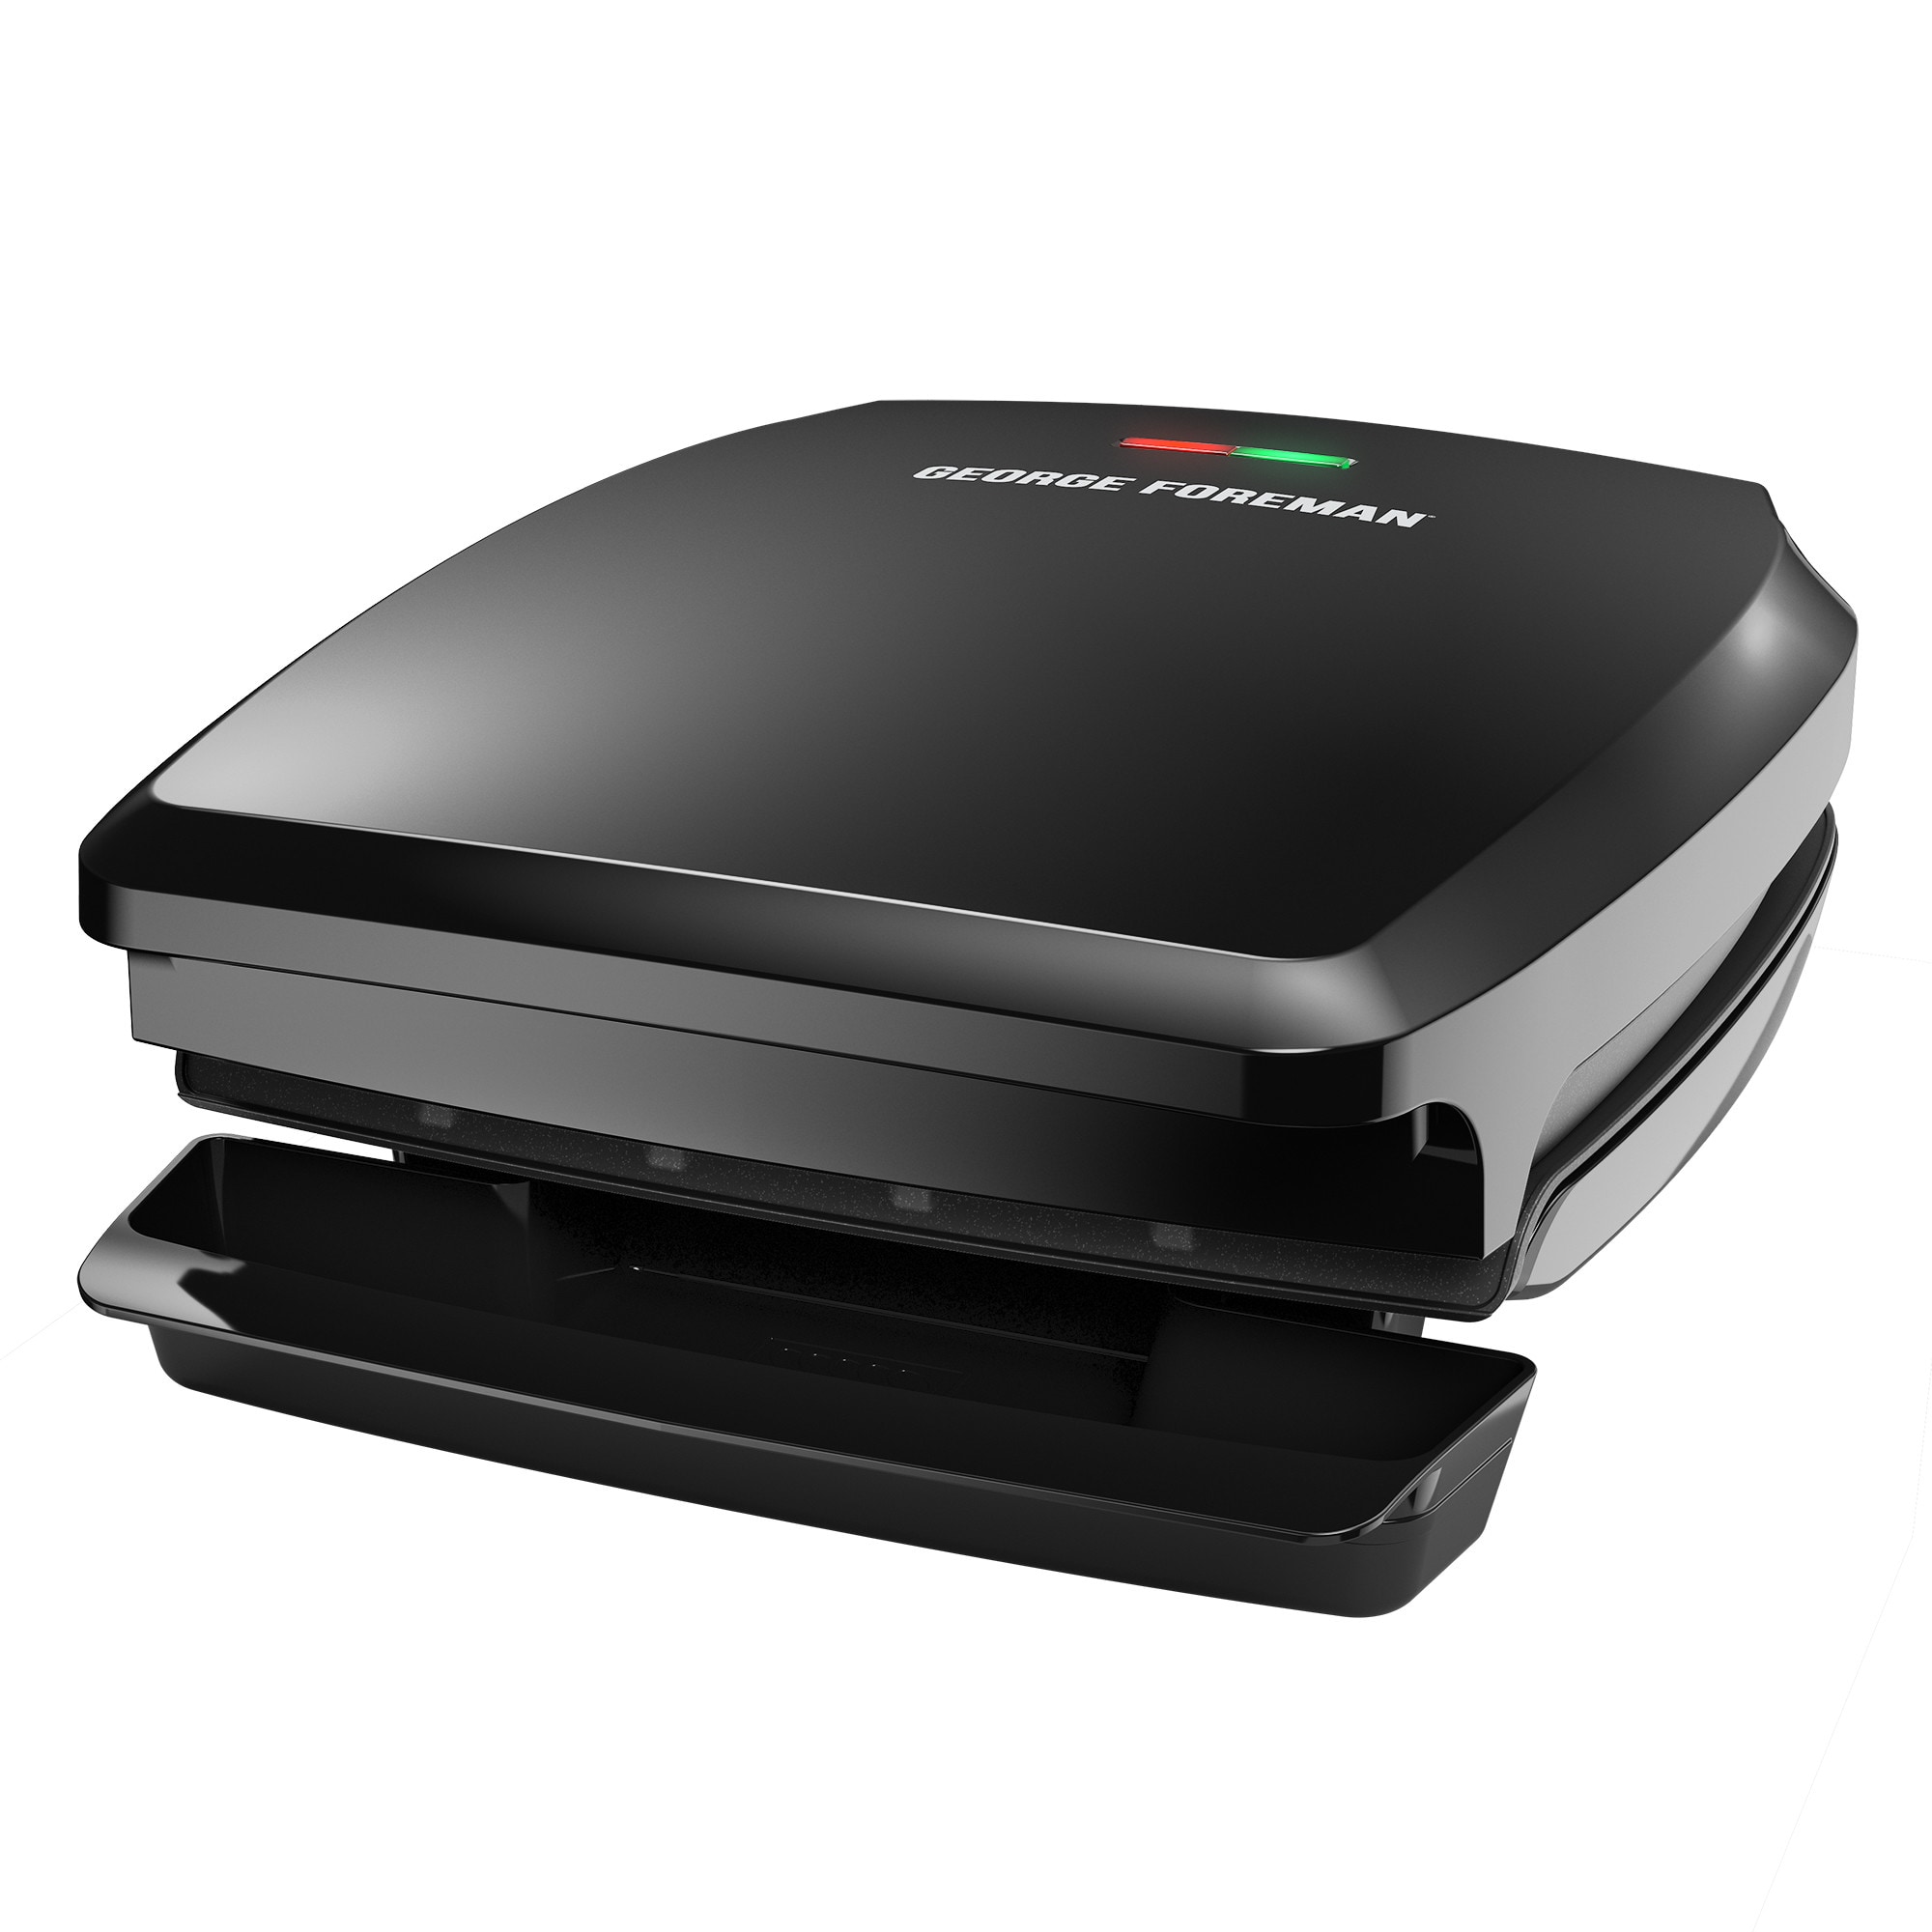 Black Renewed George Foreman GR340FB 4-Serving Classic Plate Electric Indoor Grill and Panini Press